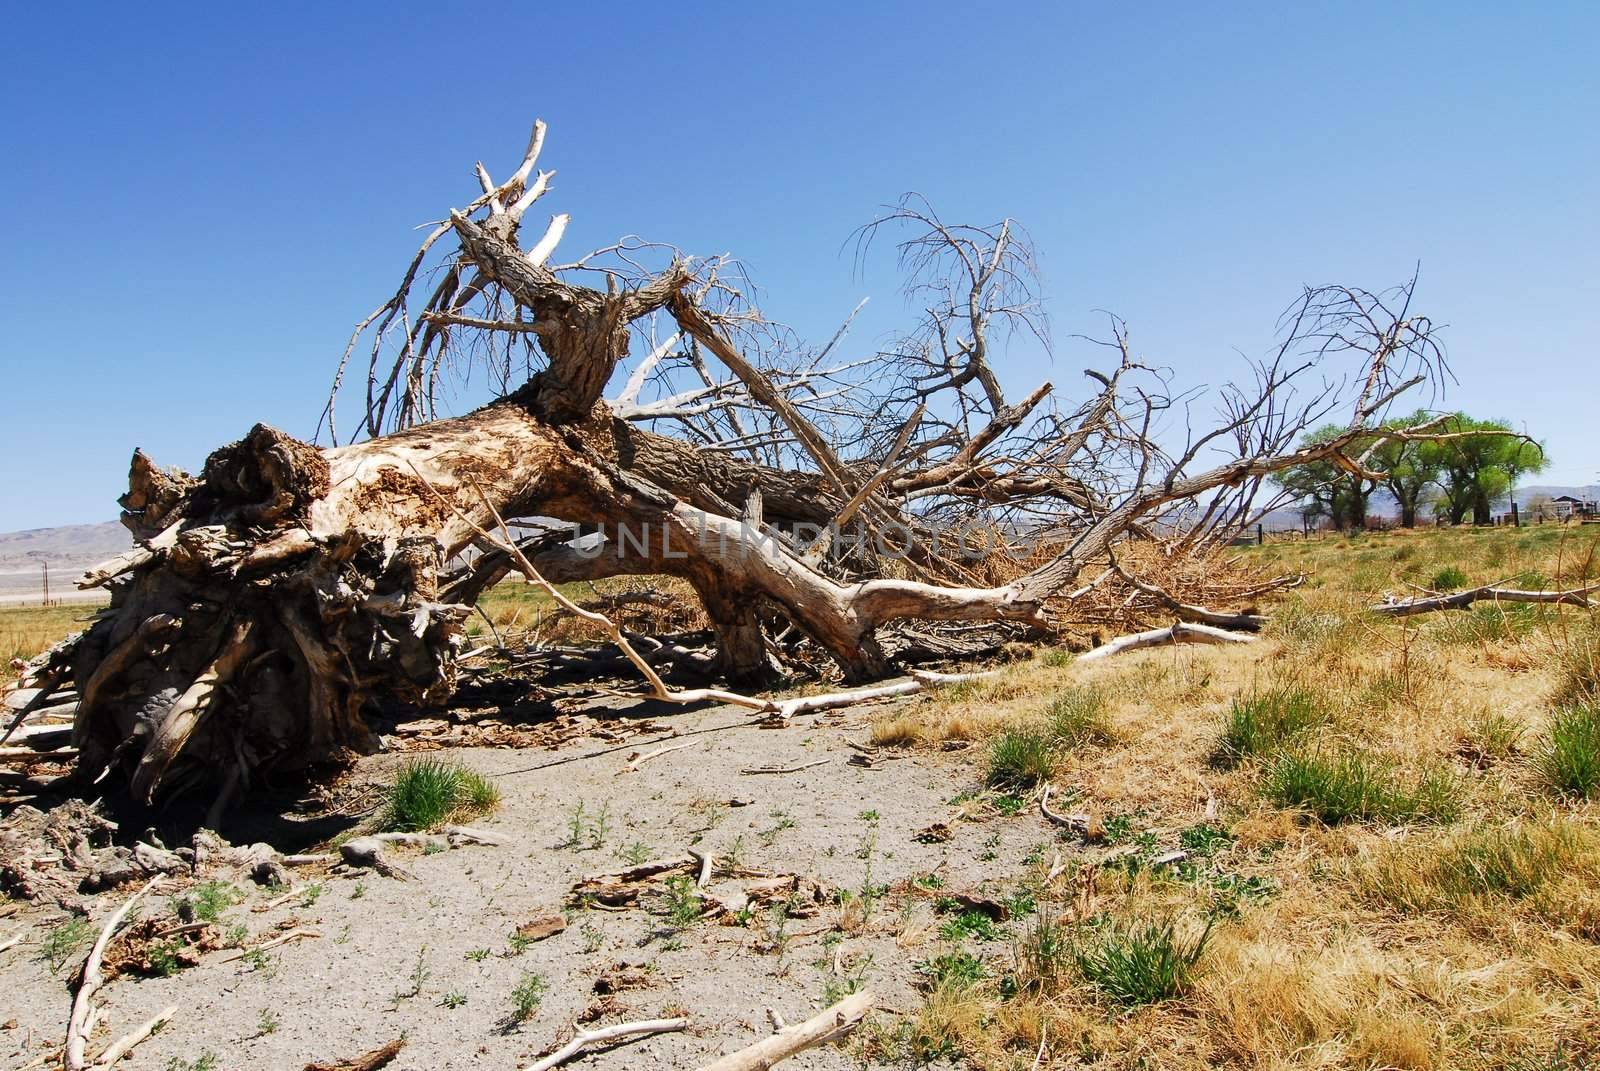 An Uprooted Fallen Dry Tree in a field